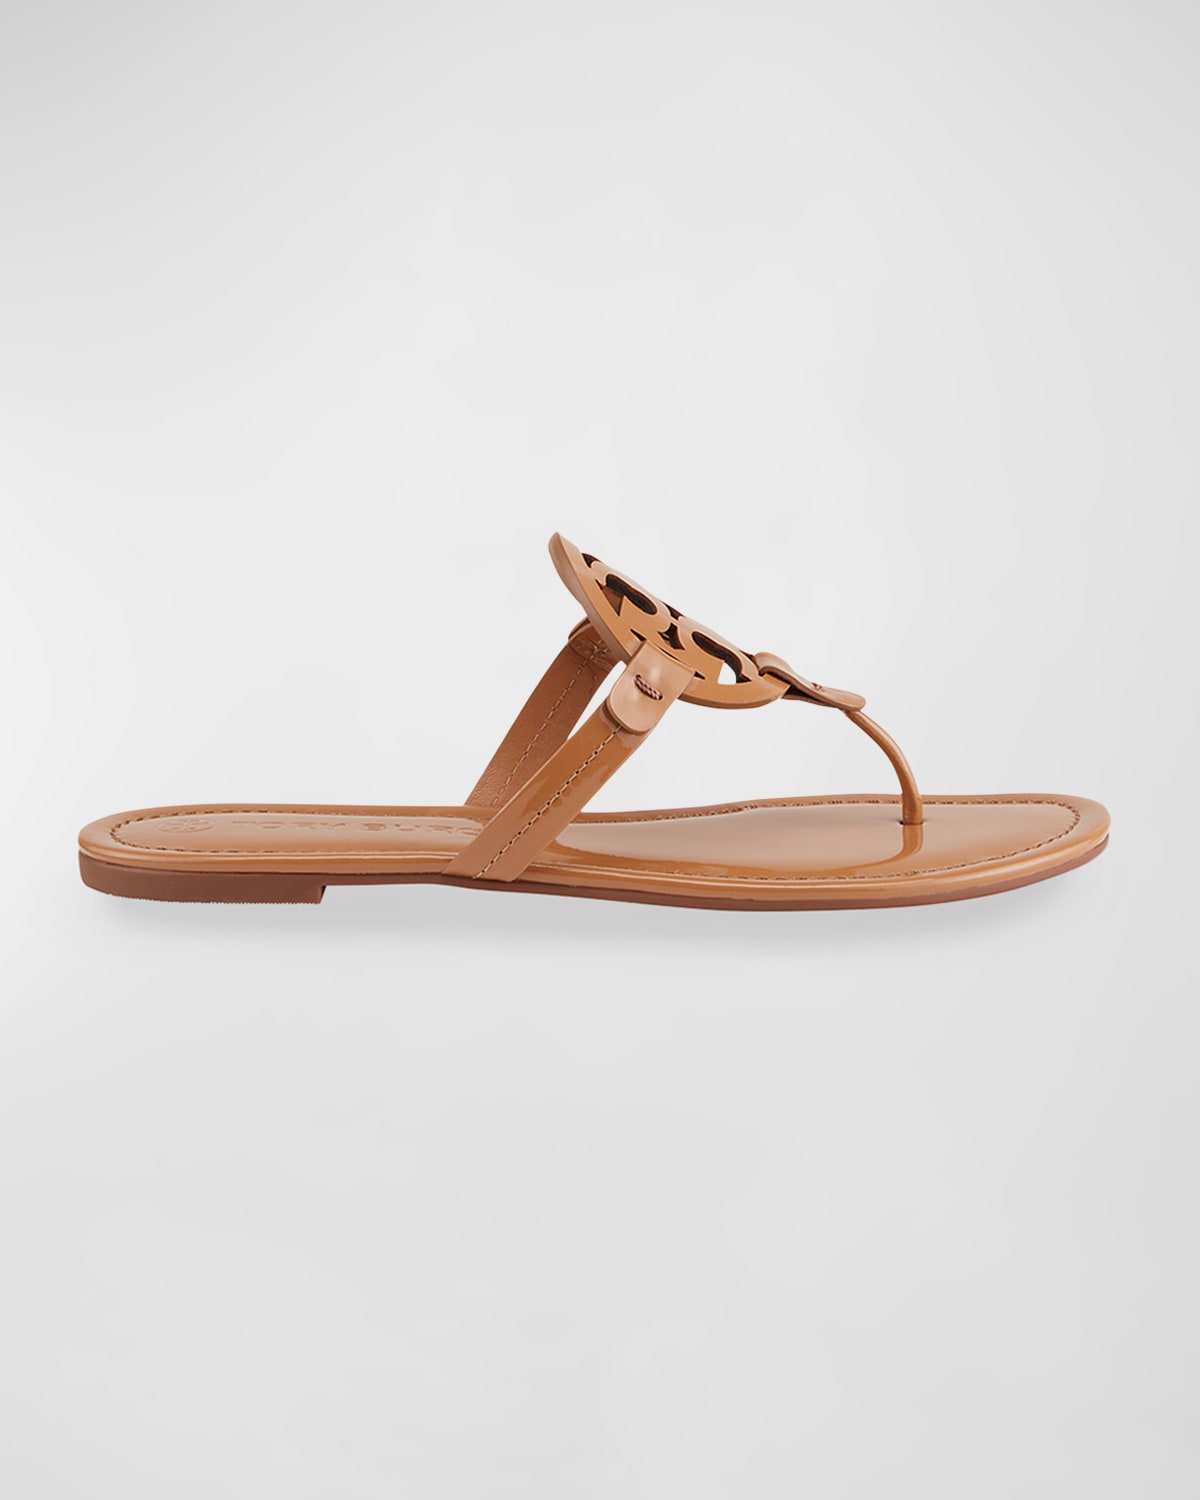 Tory Burch Miller Patent Leather Sandals In Tan